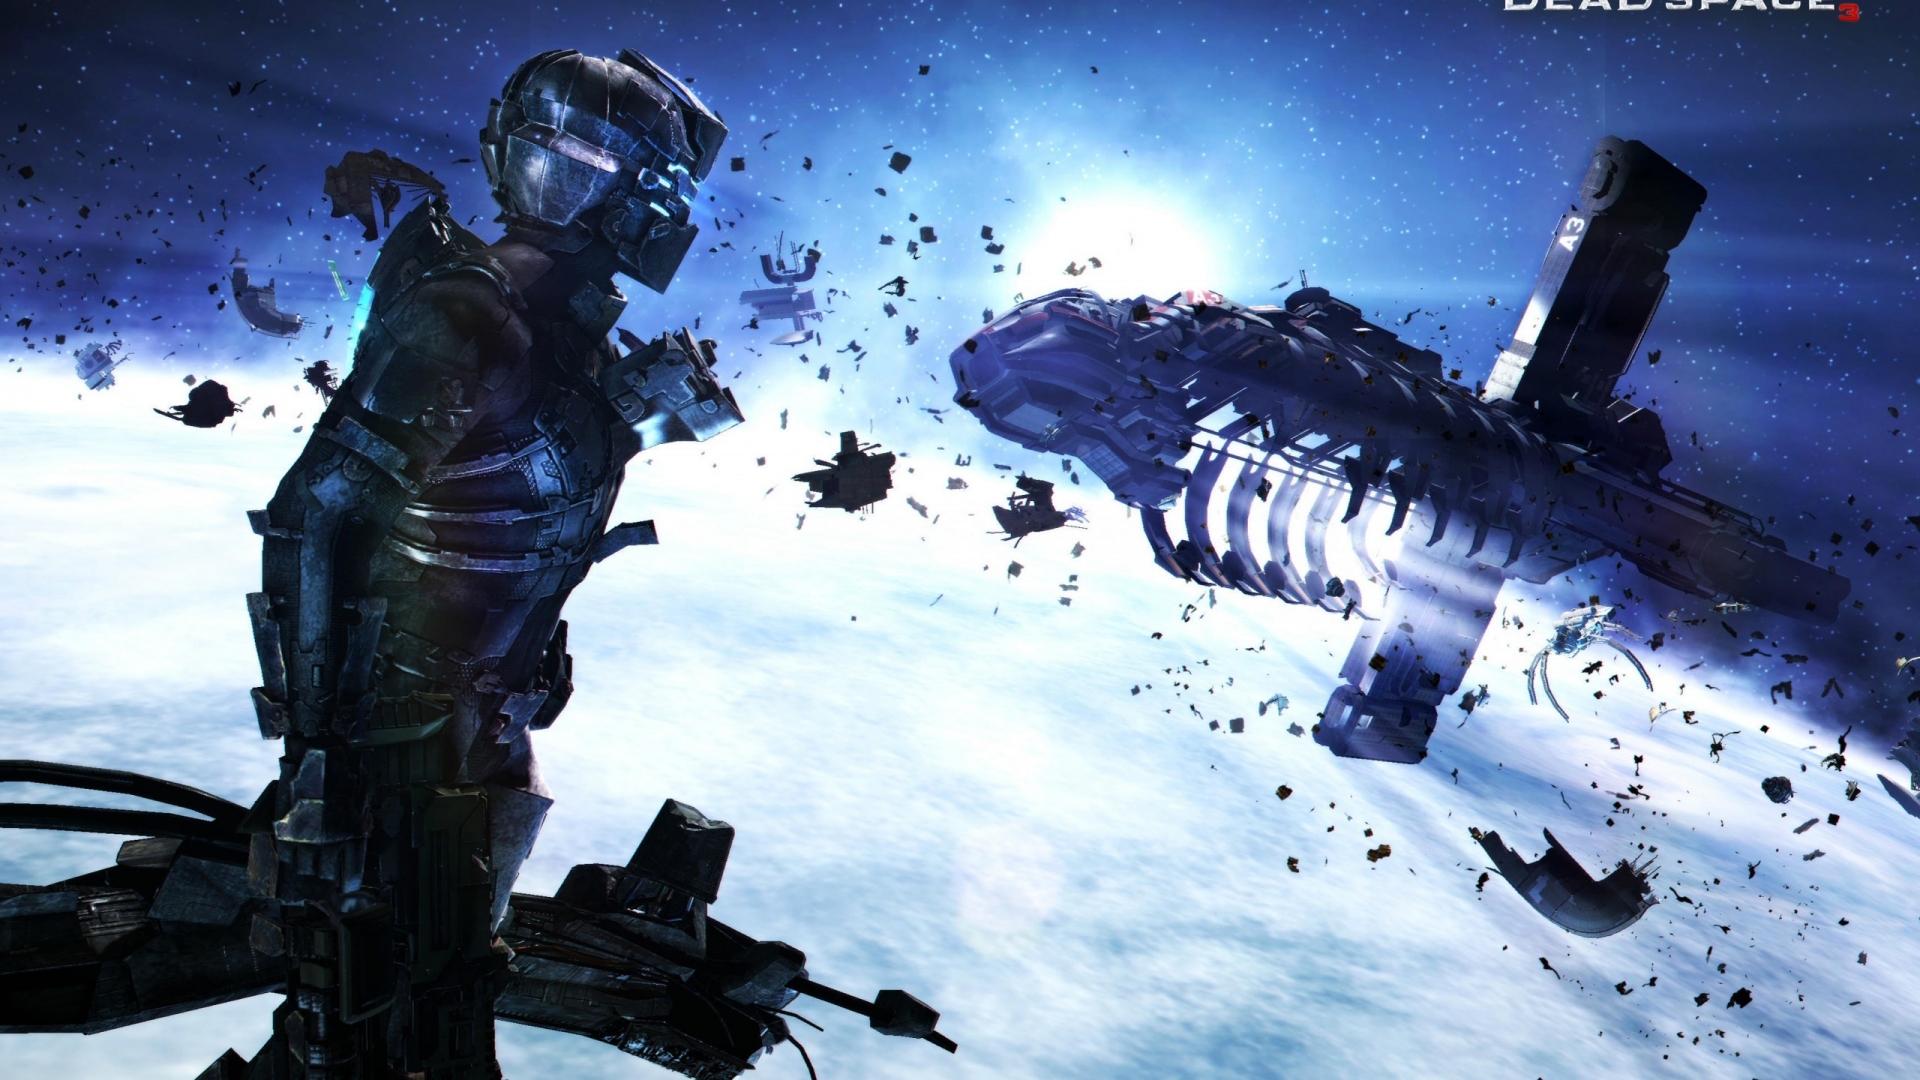 Dead Space 3 Poster for 1920 x 1080 HDTV 1080p resolution